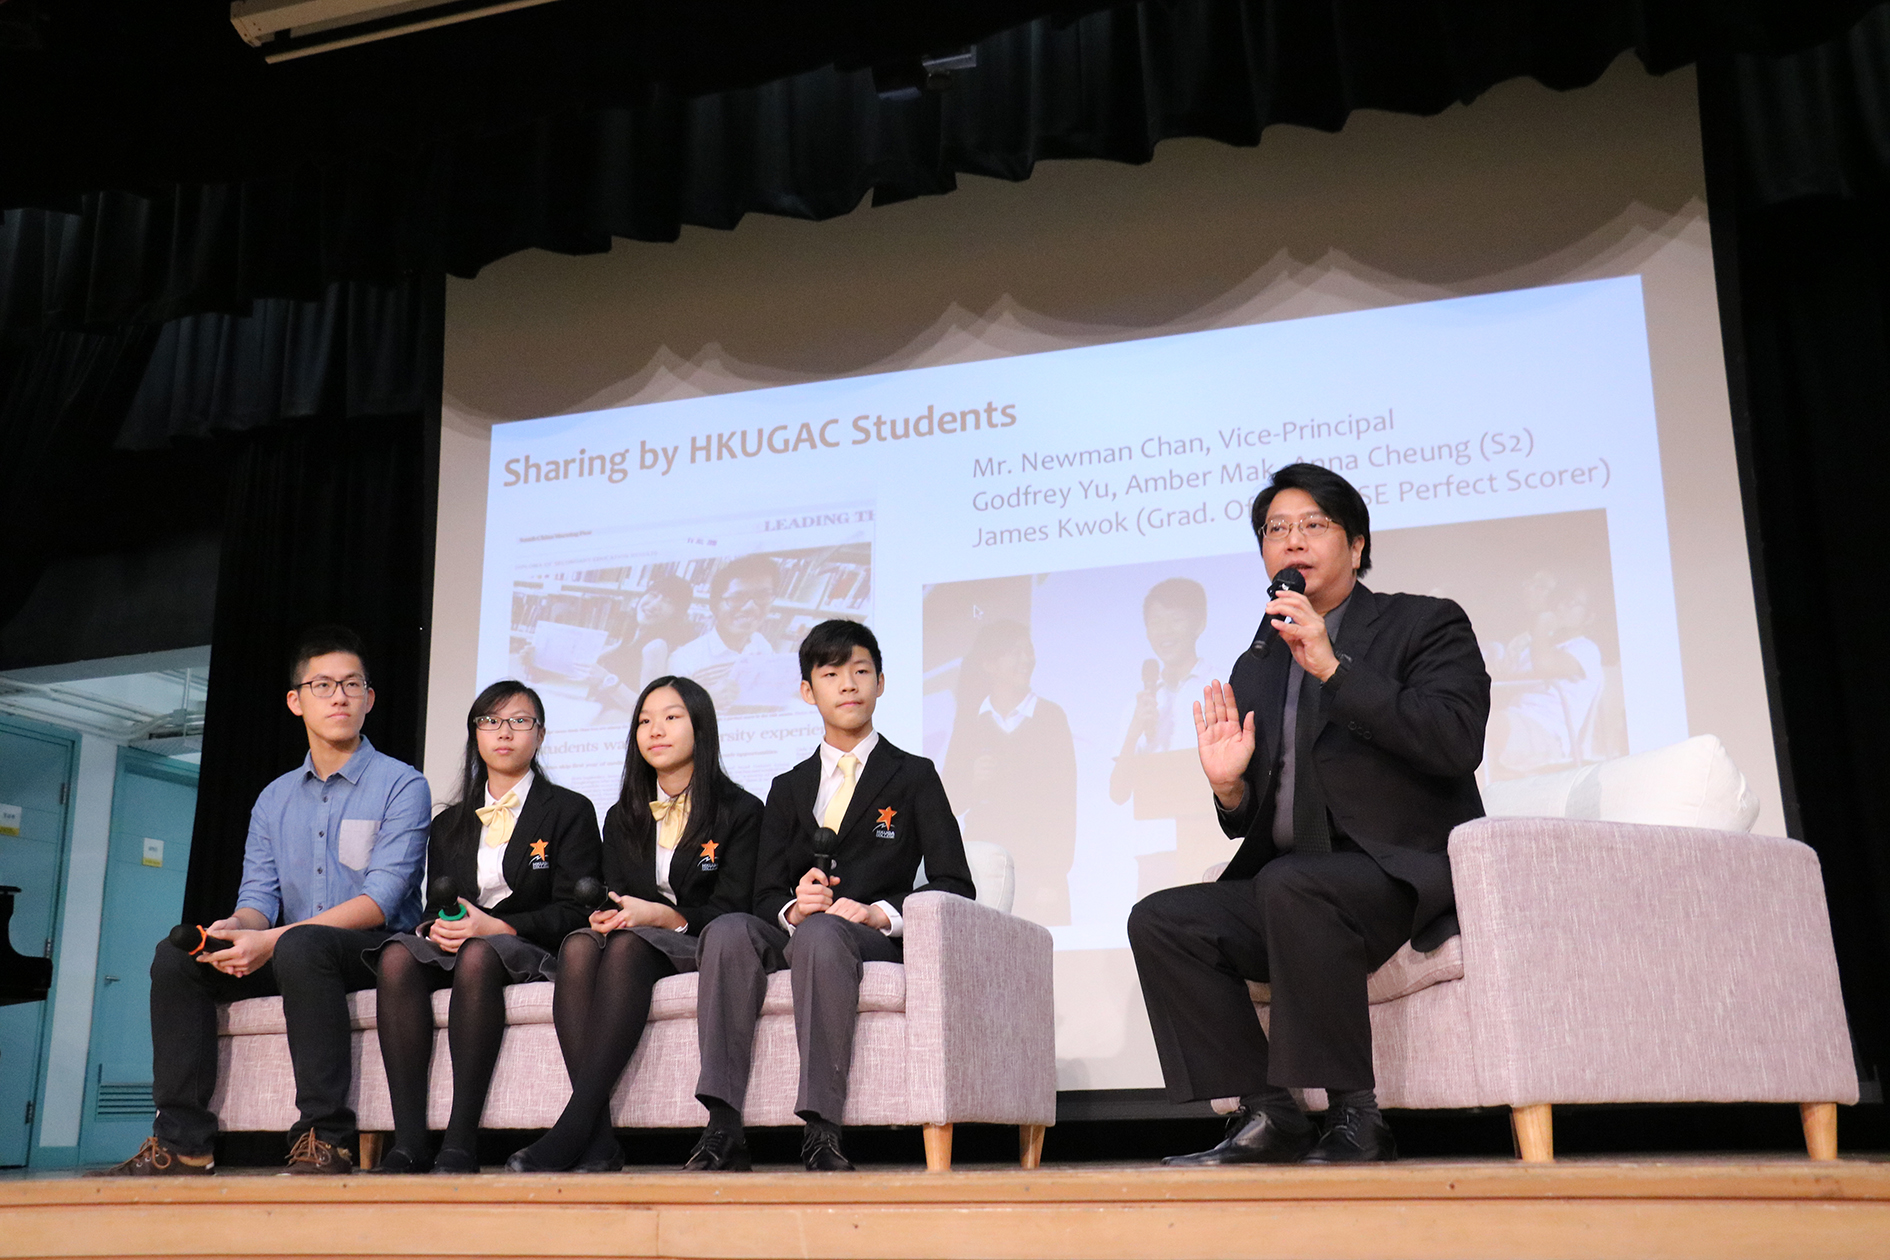 Mr. Newman Chan, the Vice Principal hosting the sharing session.